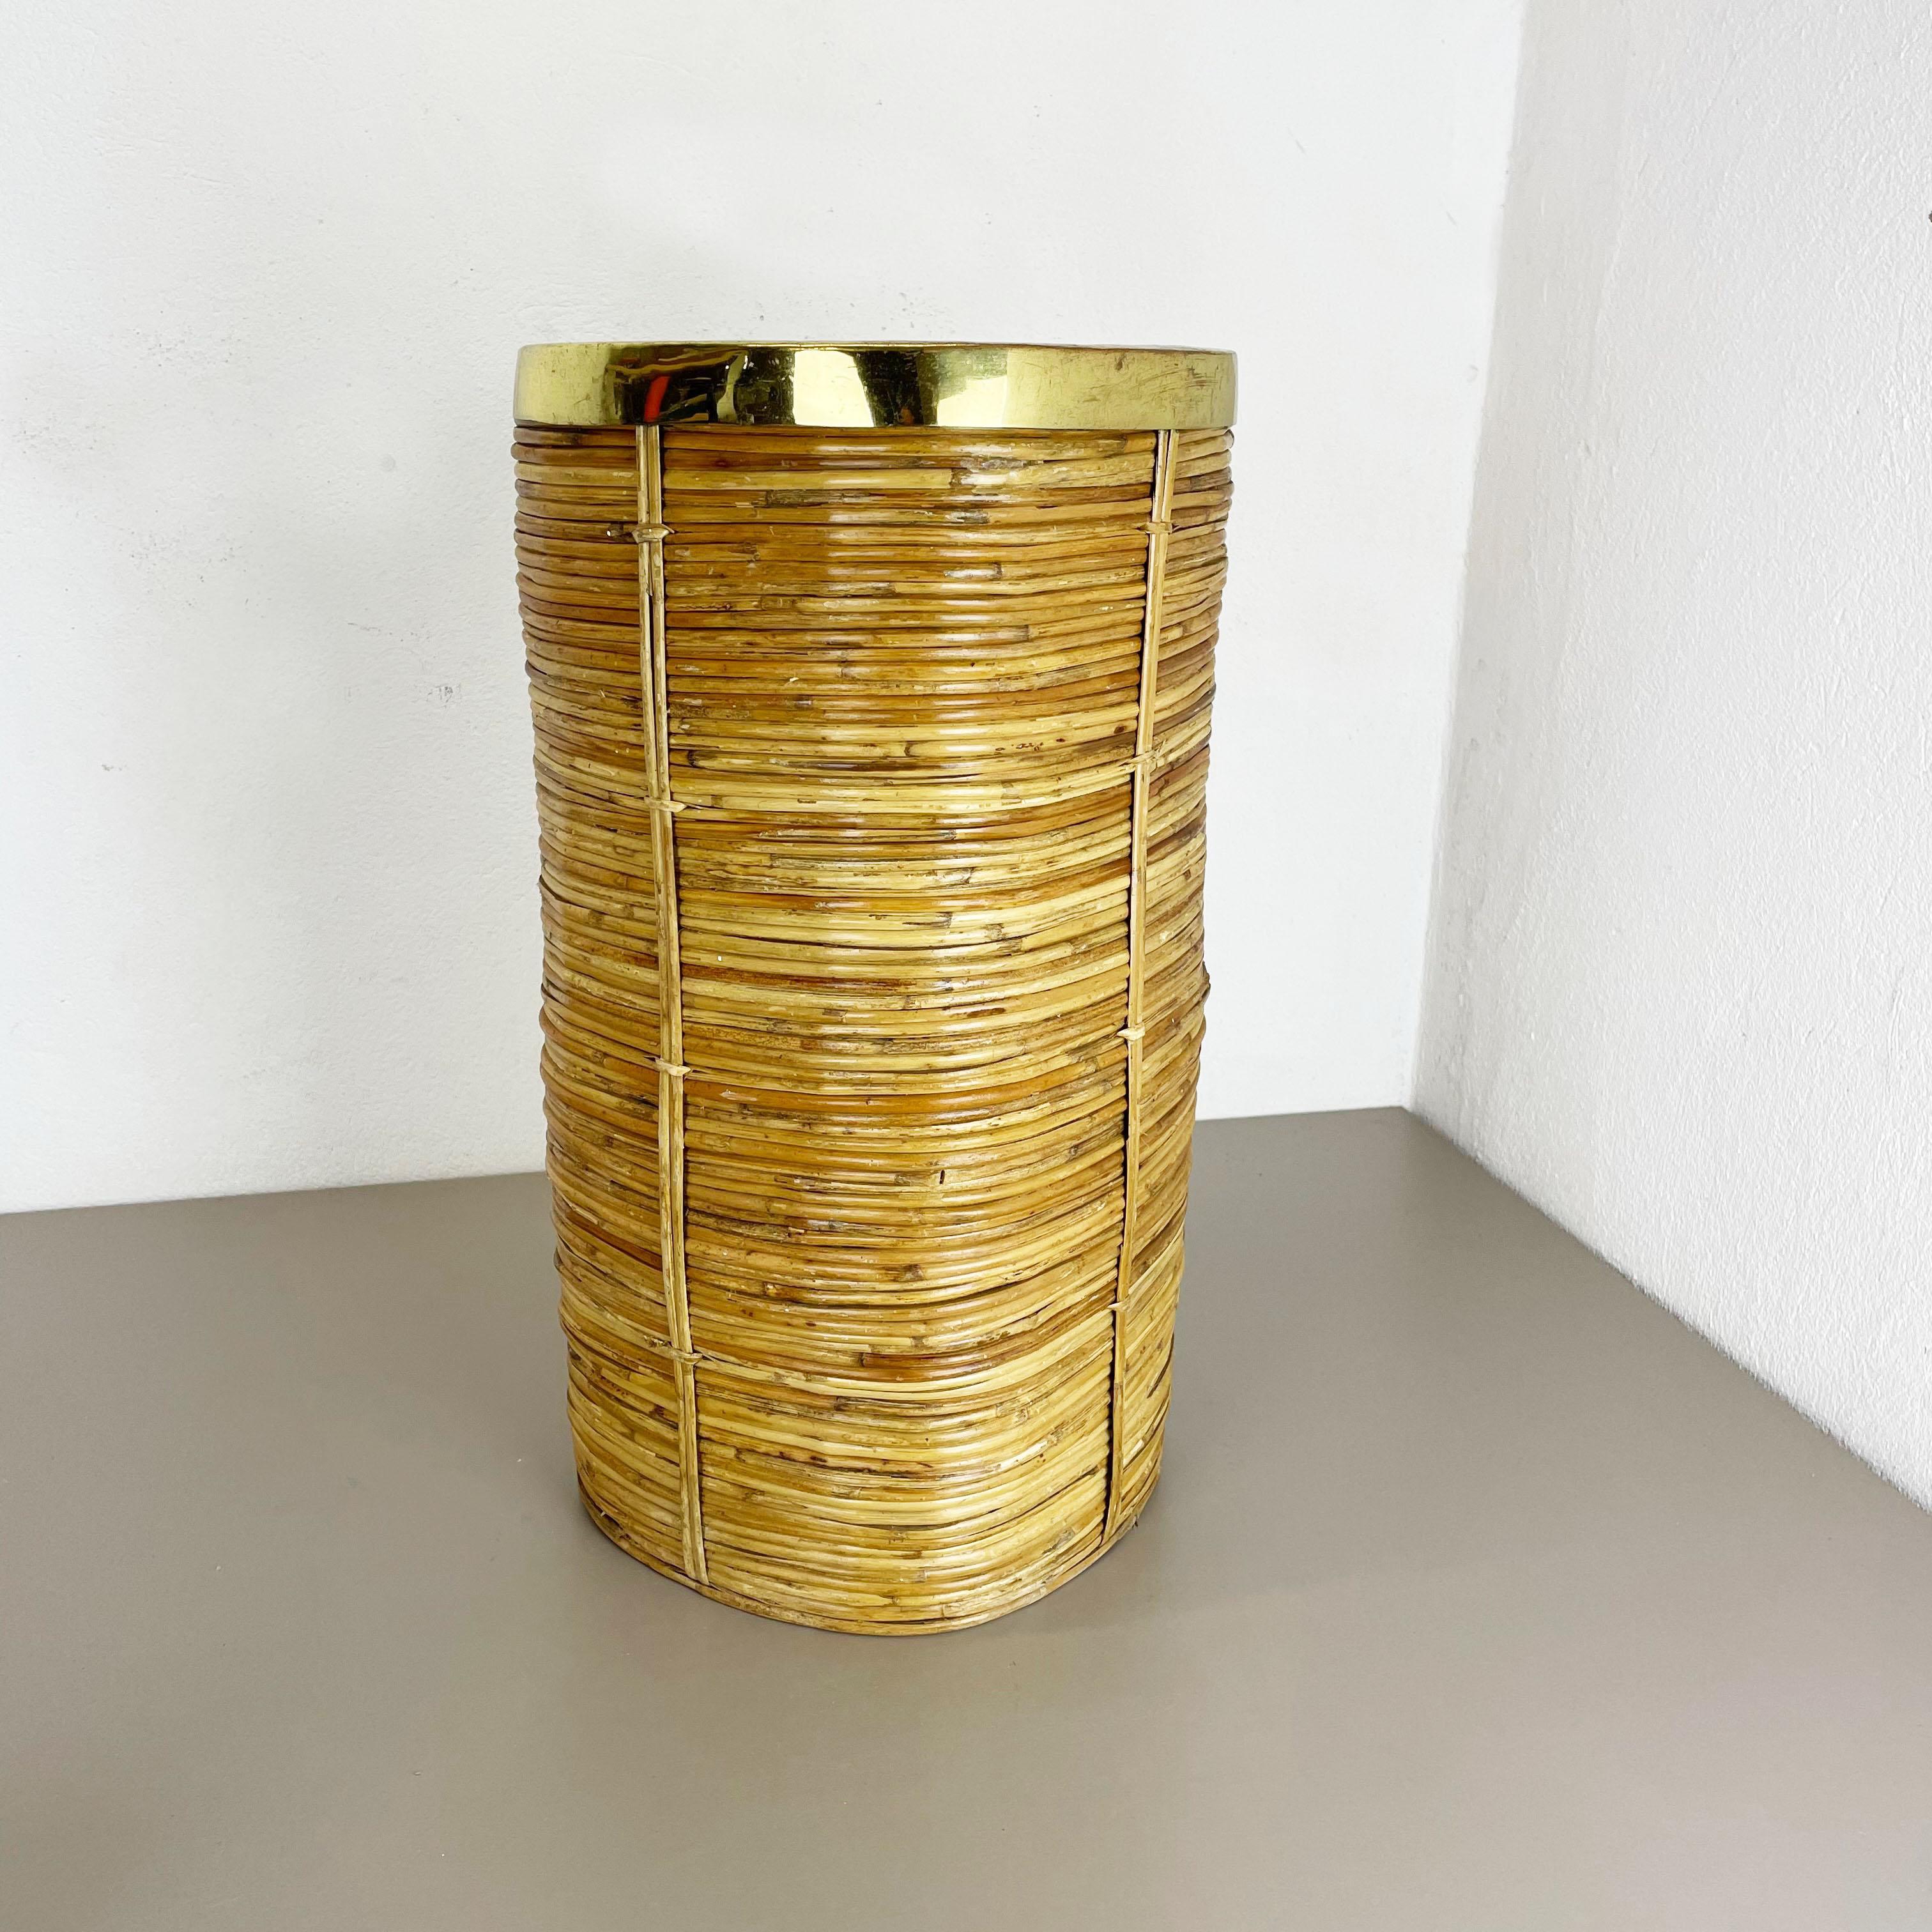 Article: waste bin paper bin

Origin: France

Age: 1960s

This original vintage Bauhaus style waste bin paper bin was produced in the 1960s in France. It is made of natural rattan with a brass applications at the top edge ring. this item has a